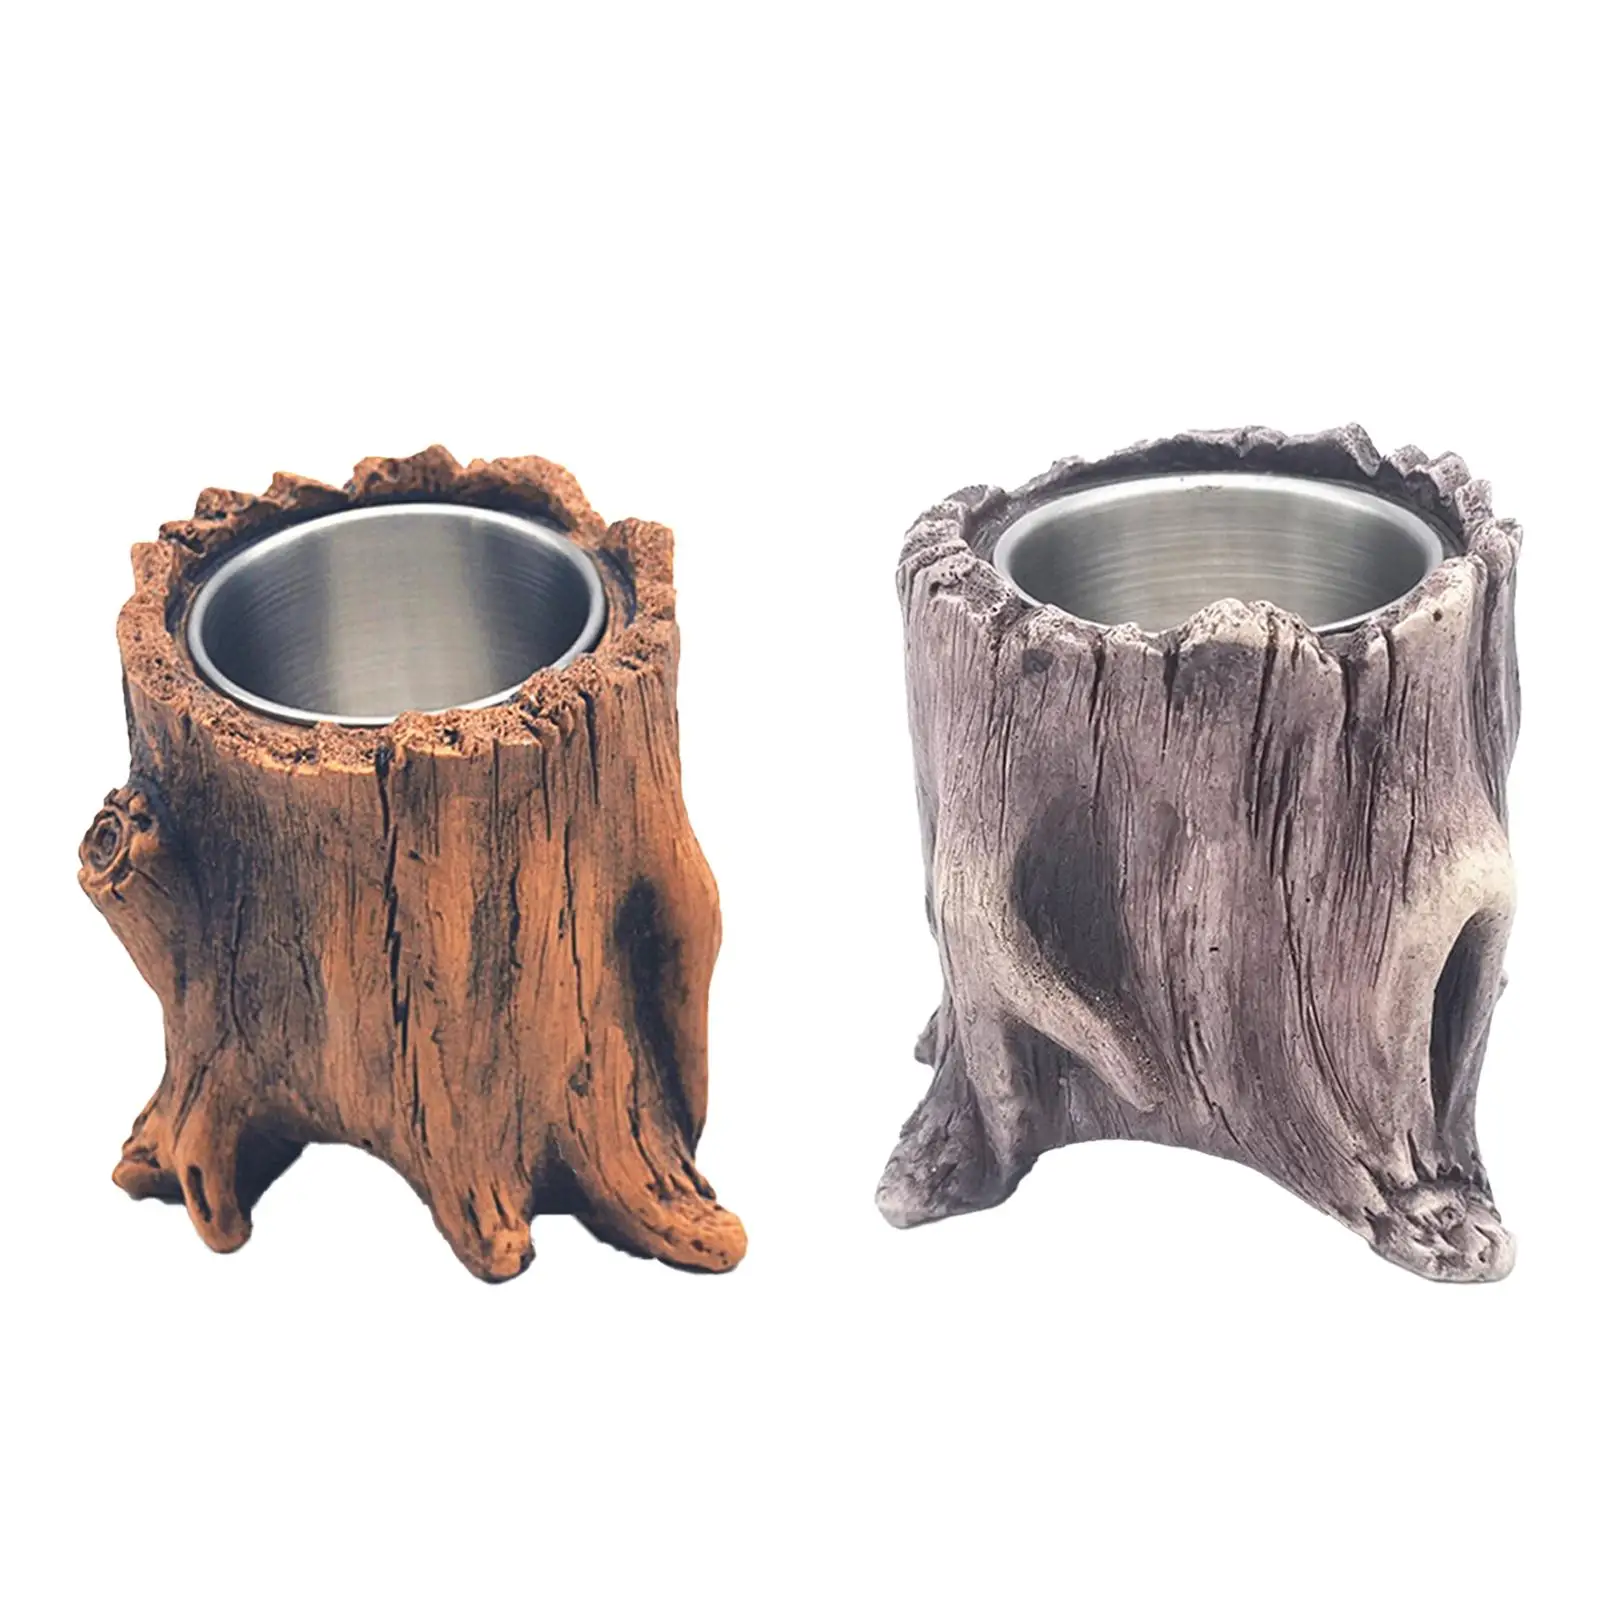 Tabletop Fireplace Tree Stump Durable Conch Long Burning Alcohol Fireplace for Camping Gardens Living Room Balconies Ornament